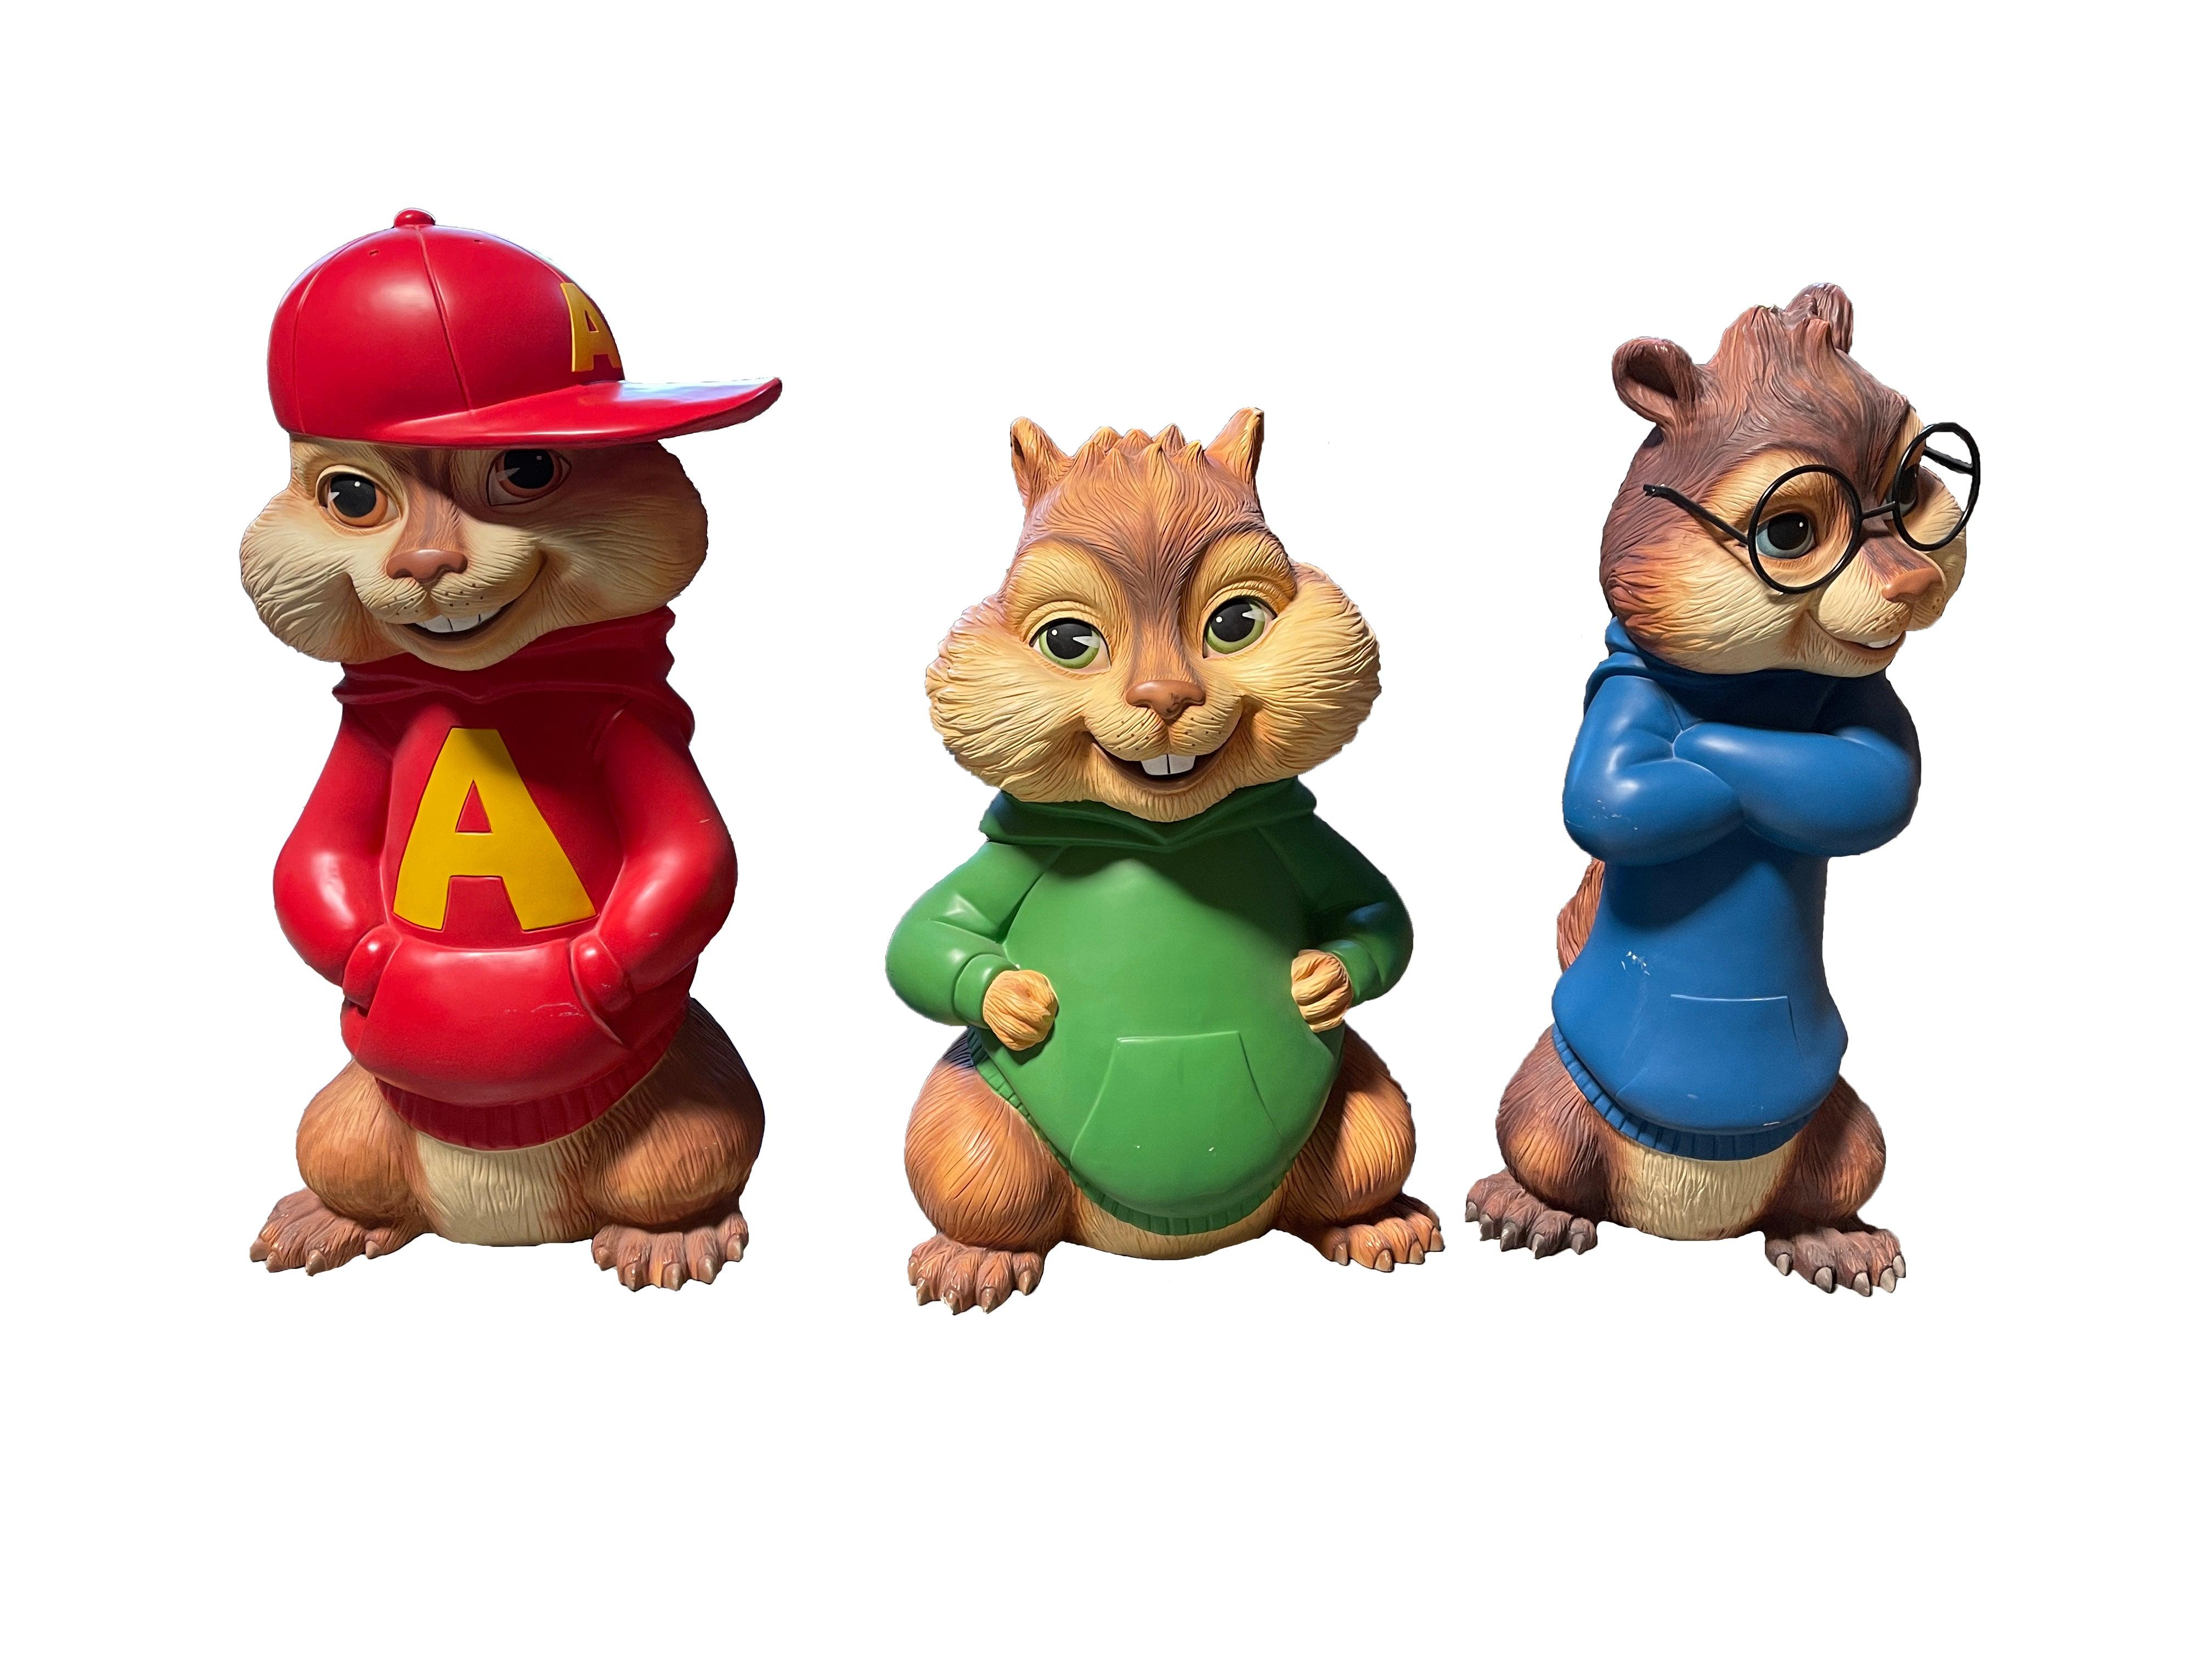 Classic Alvin and the Chipmunks Statue